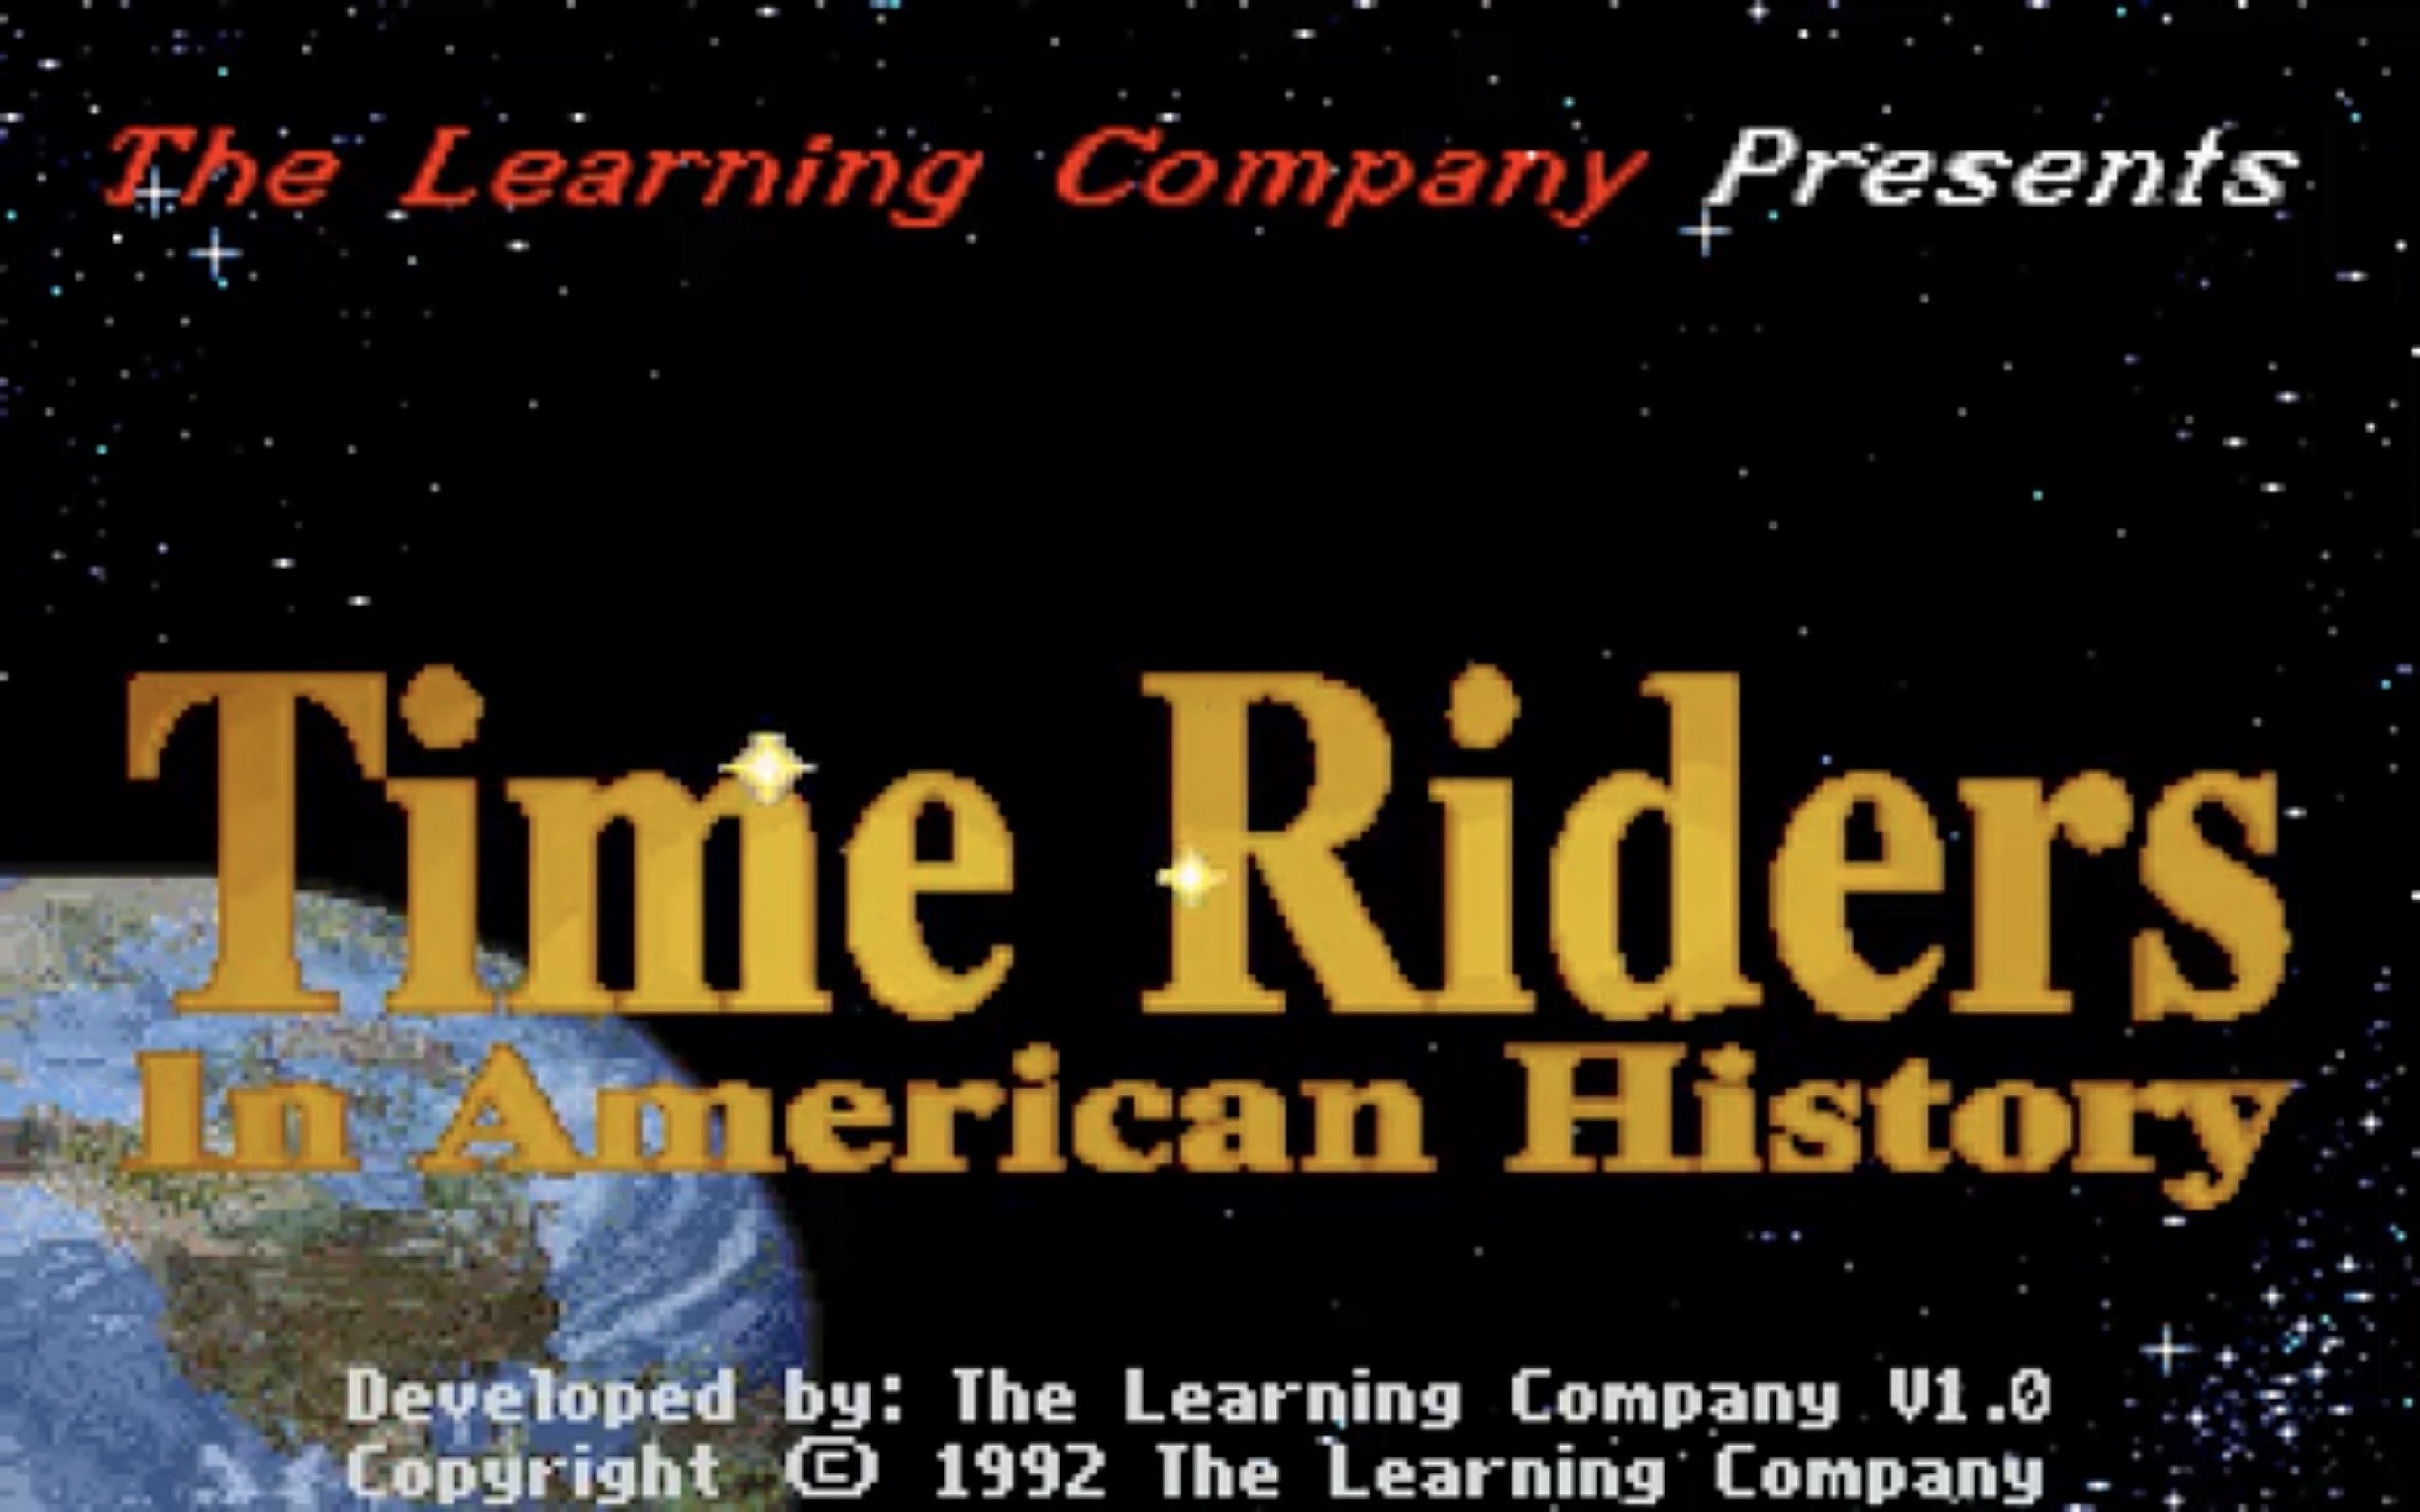 The title screen for the game, with the title floating in space over the earth